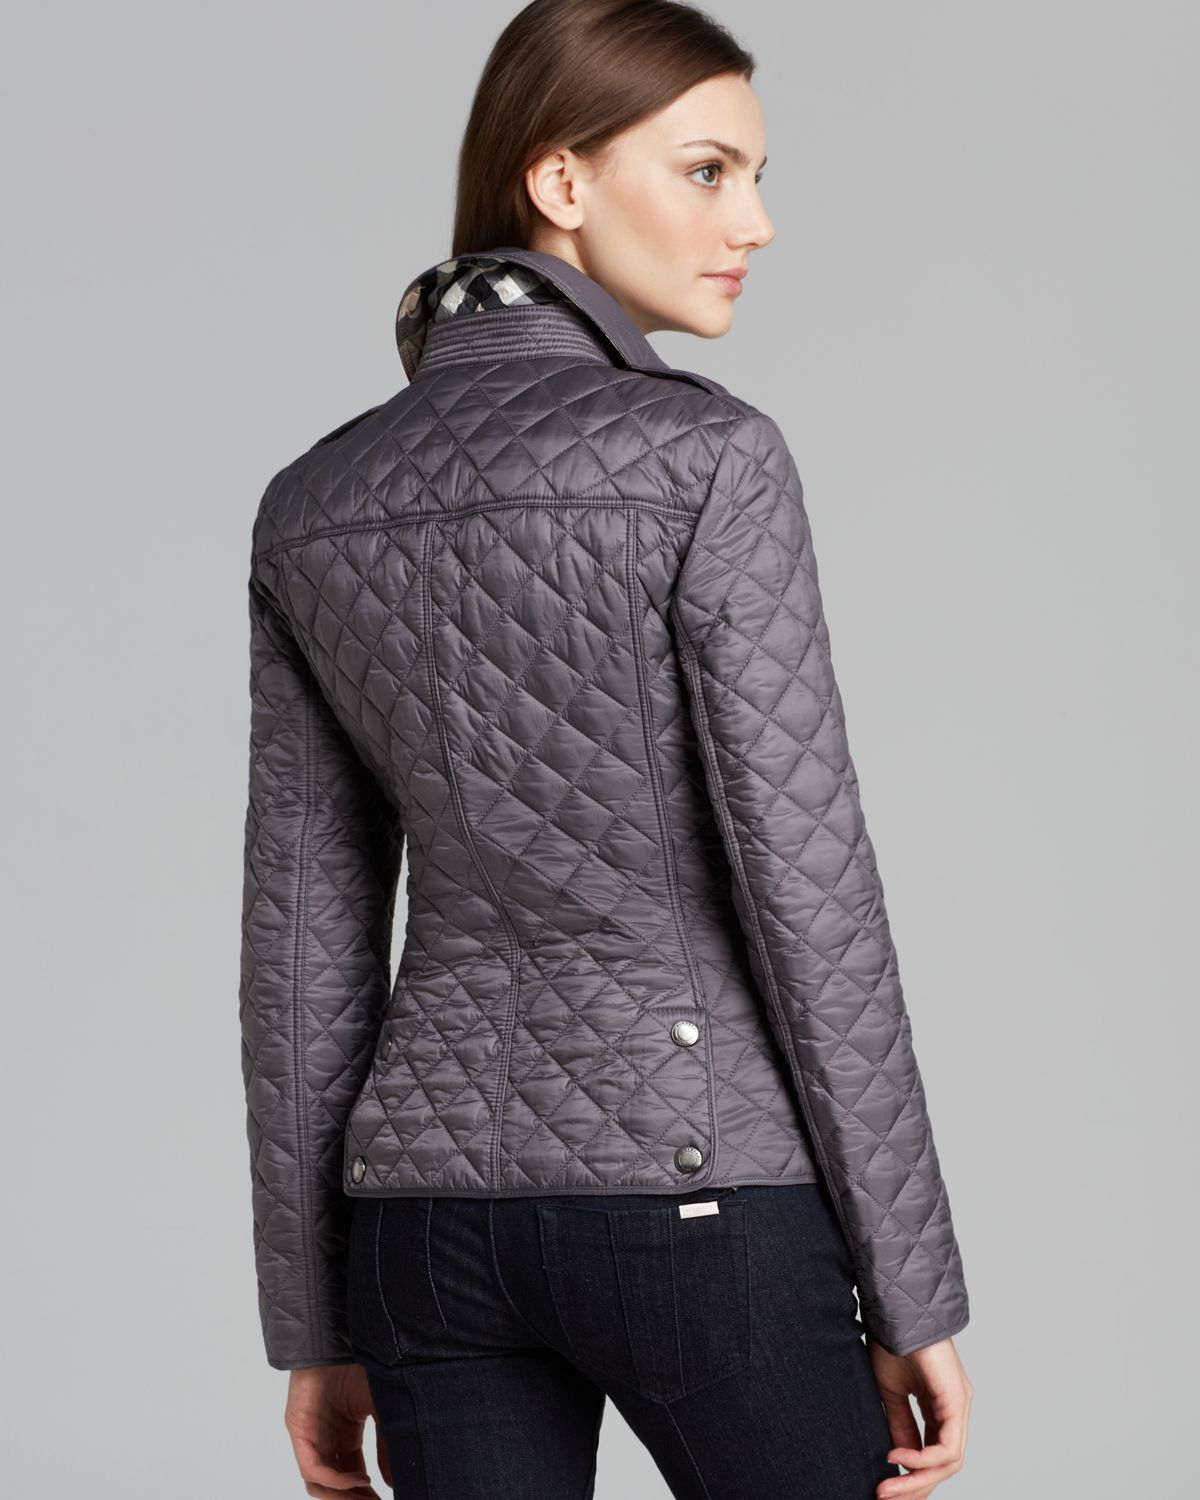 Burberry Brit Kencott Quilted Jacket in Gray - Lyst